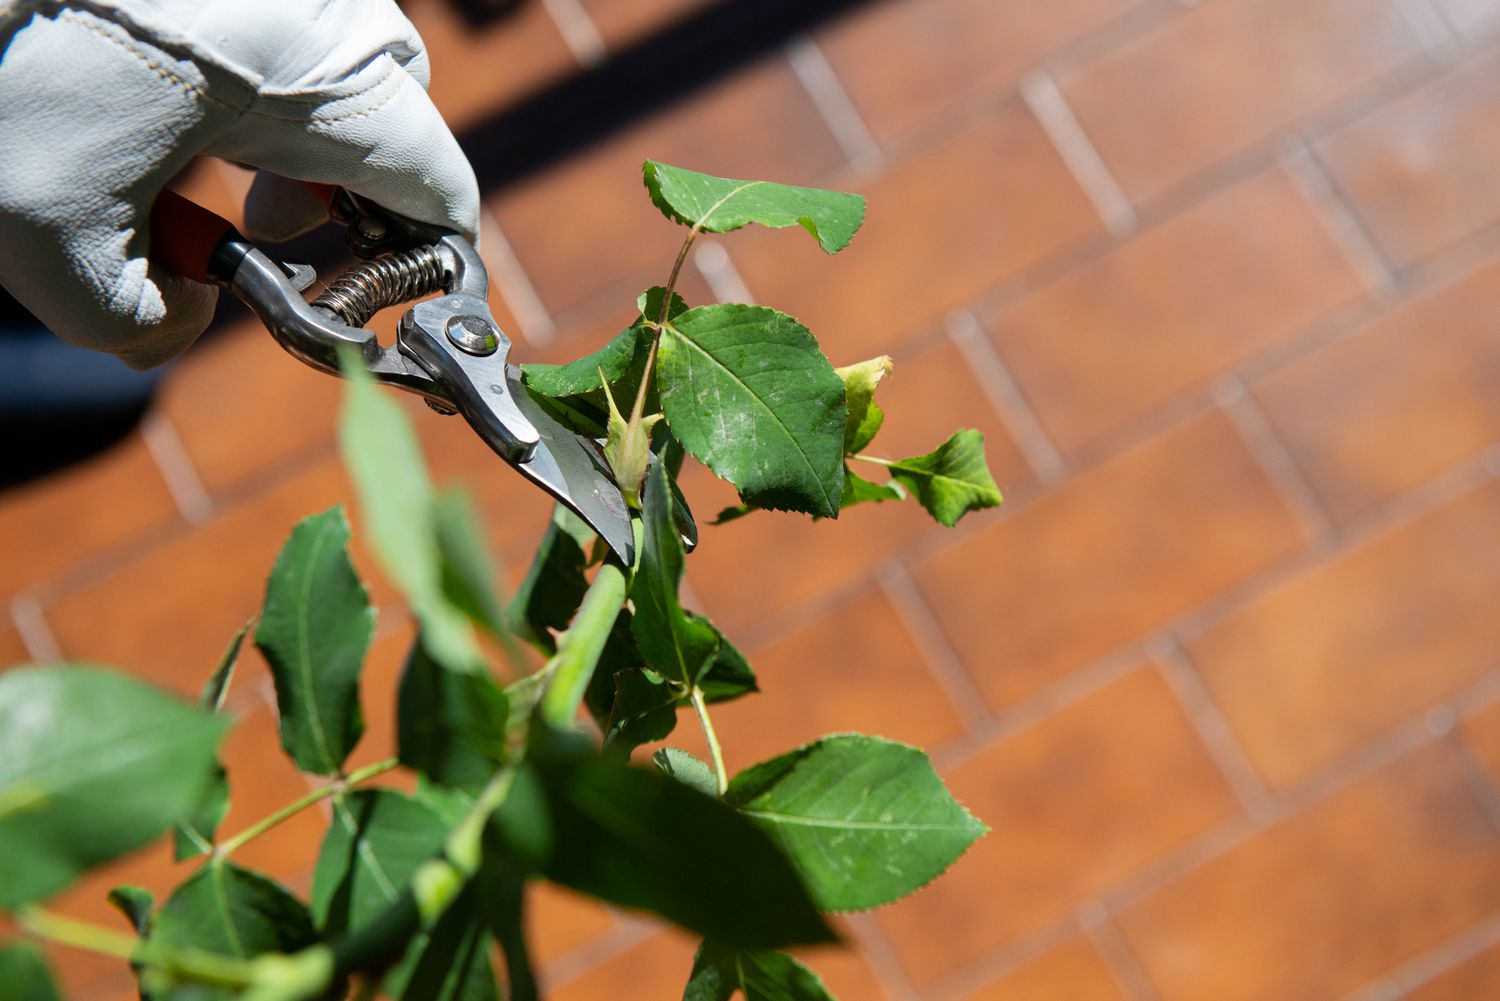 Lower leaves on rose stem cut with hand pruners for water line